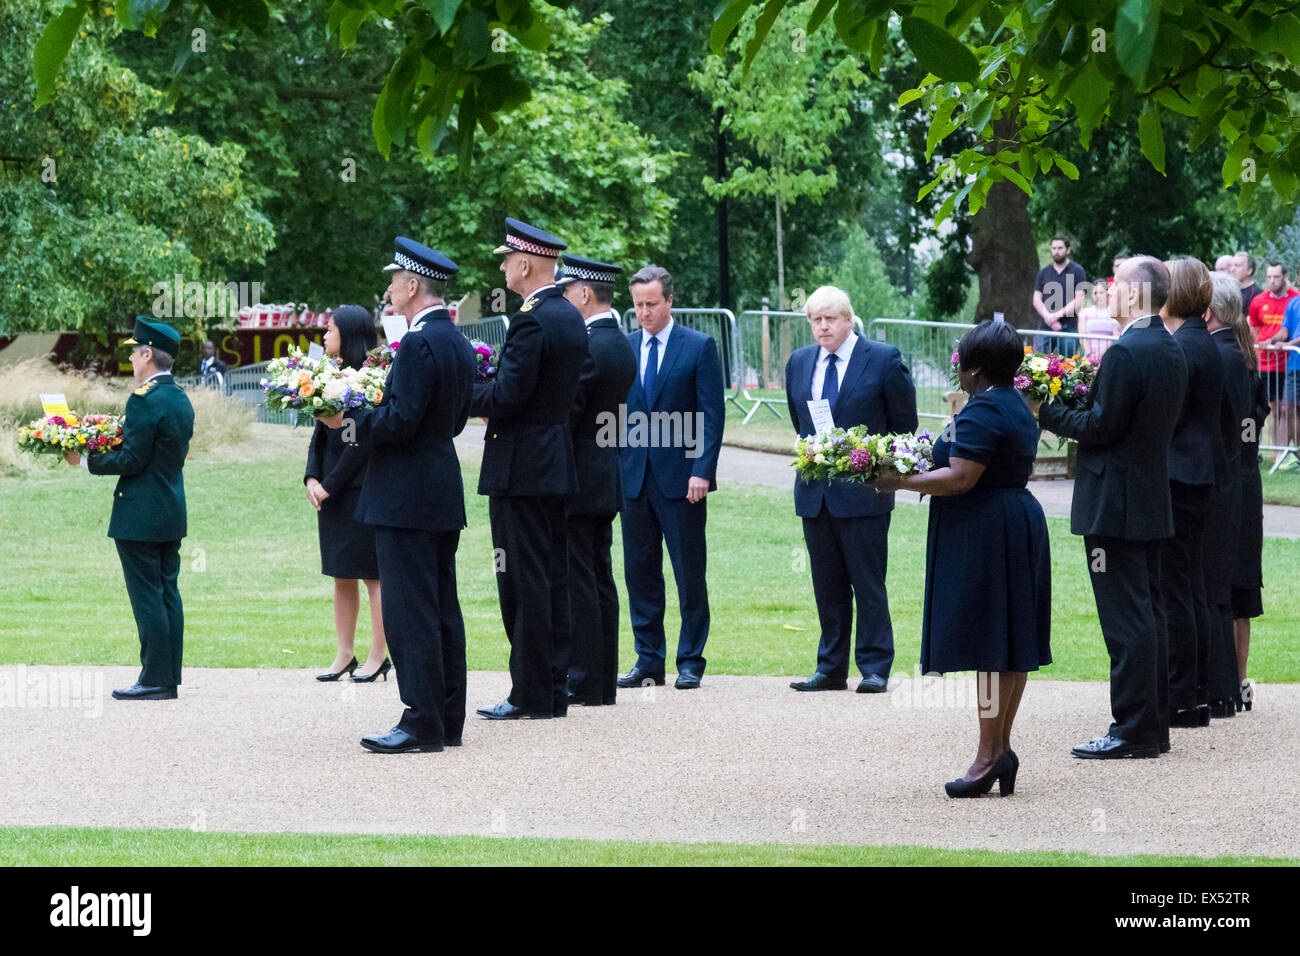 Hyde Park, London, July7th 2015. The Mayor of London Boris Johnson and other senior political figures, the Commissioners for transport and policing in the capital, as well as senior representatives of the emergency services lay wreaths at the 7/7 memorial in Hyde Park. Credit:  Paul Davey/Alamy Live News Stock Photo